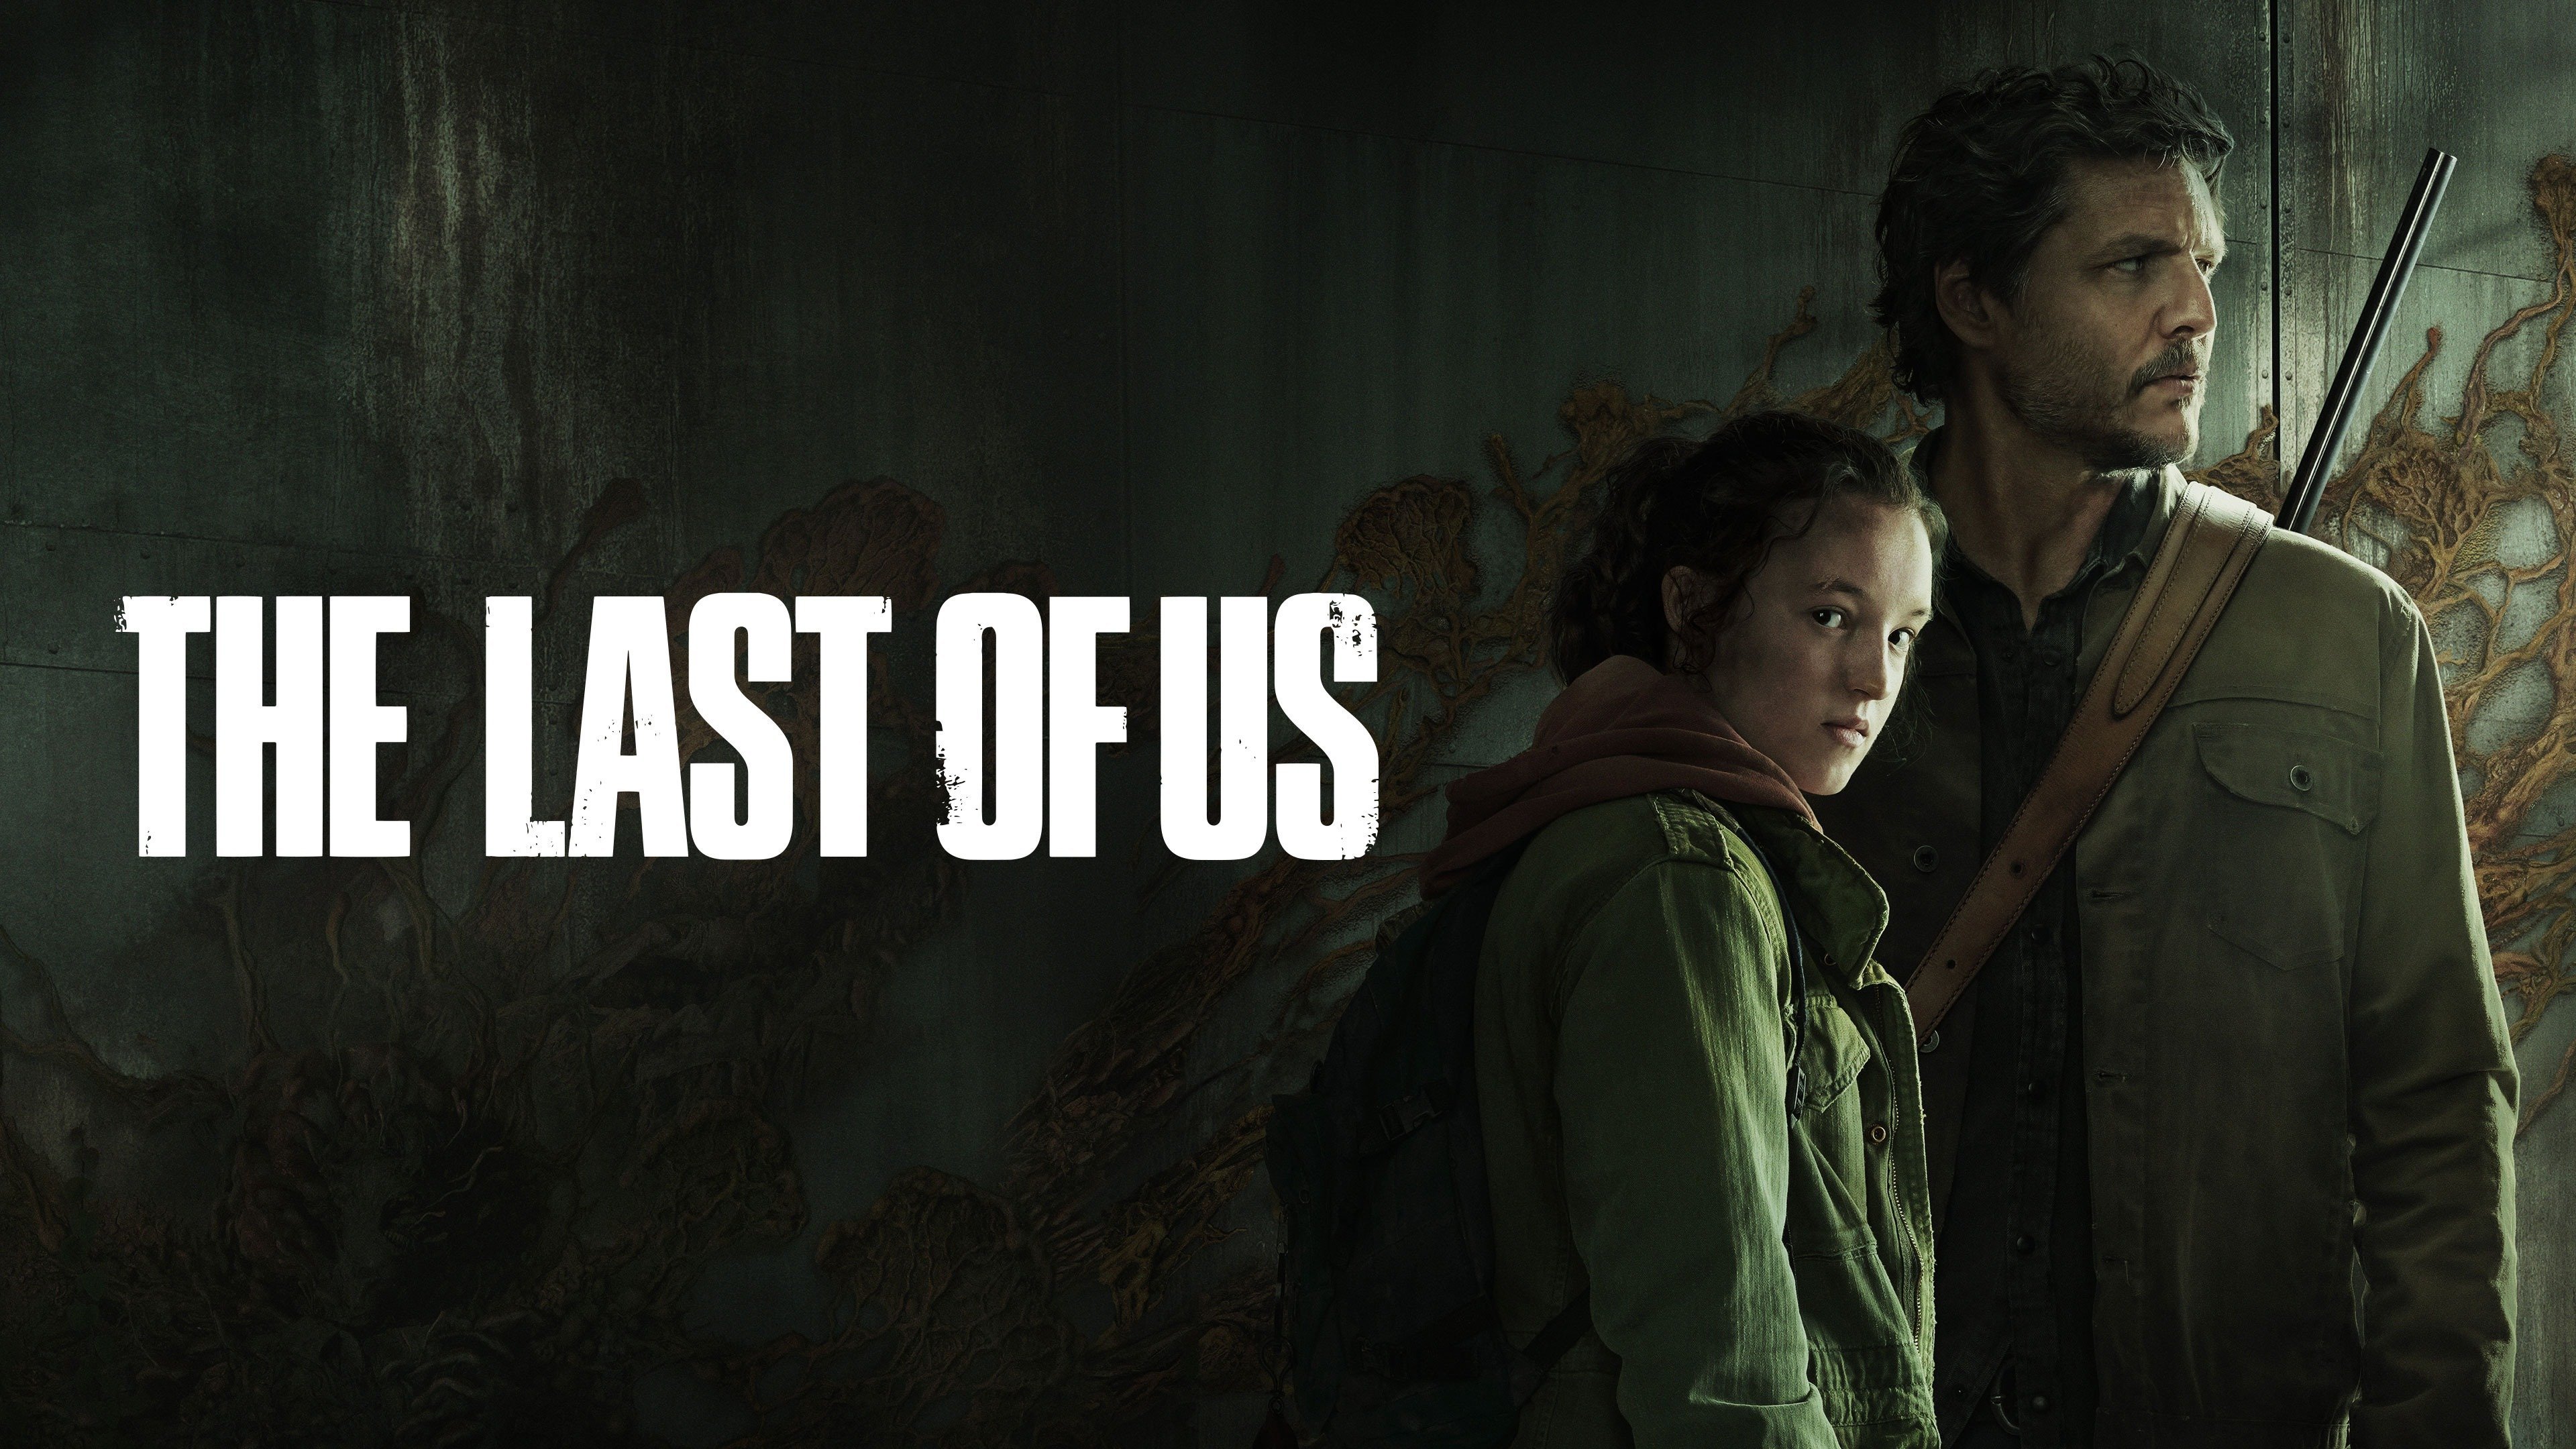 The Last Of Us: How to watch UK, when is The Last Of Us episode 4 released